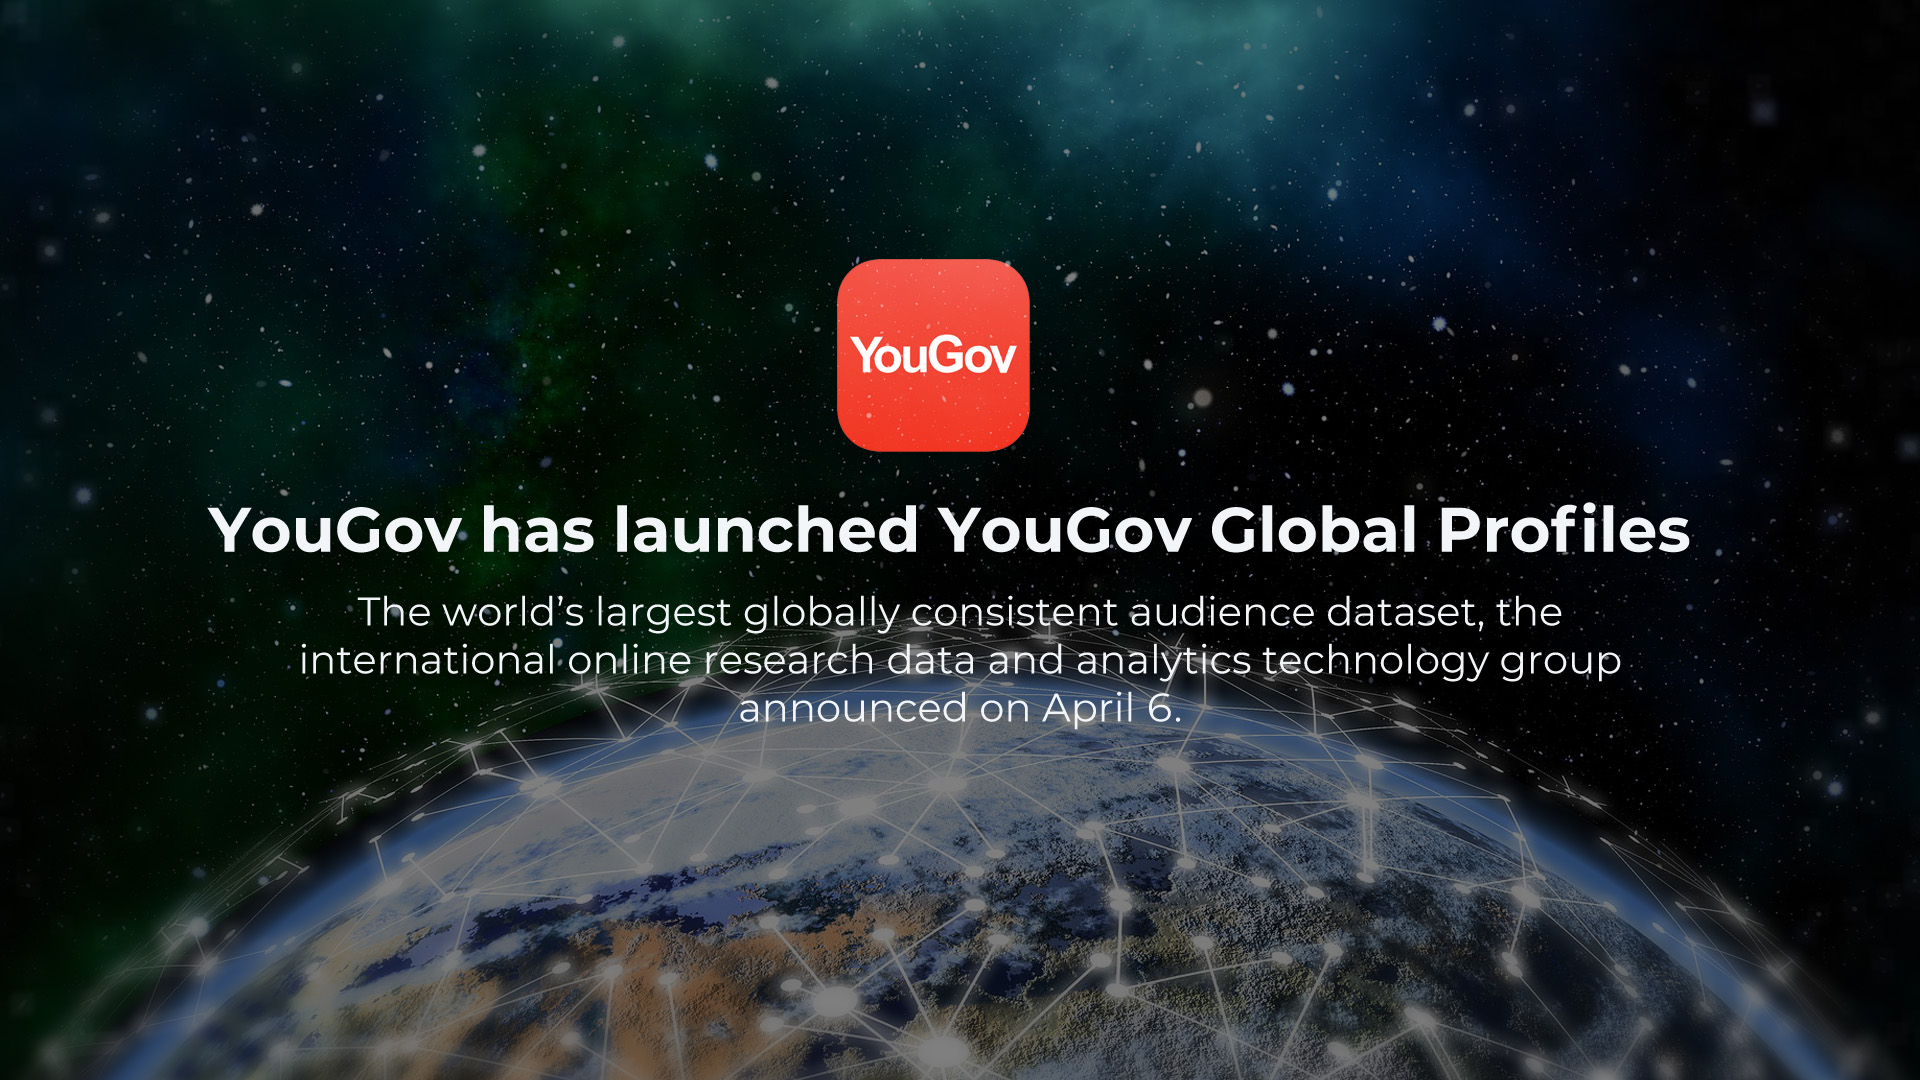 YouGov launches YouGov Global Profiles